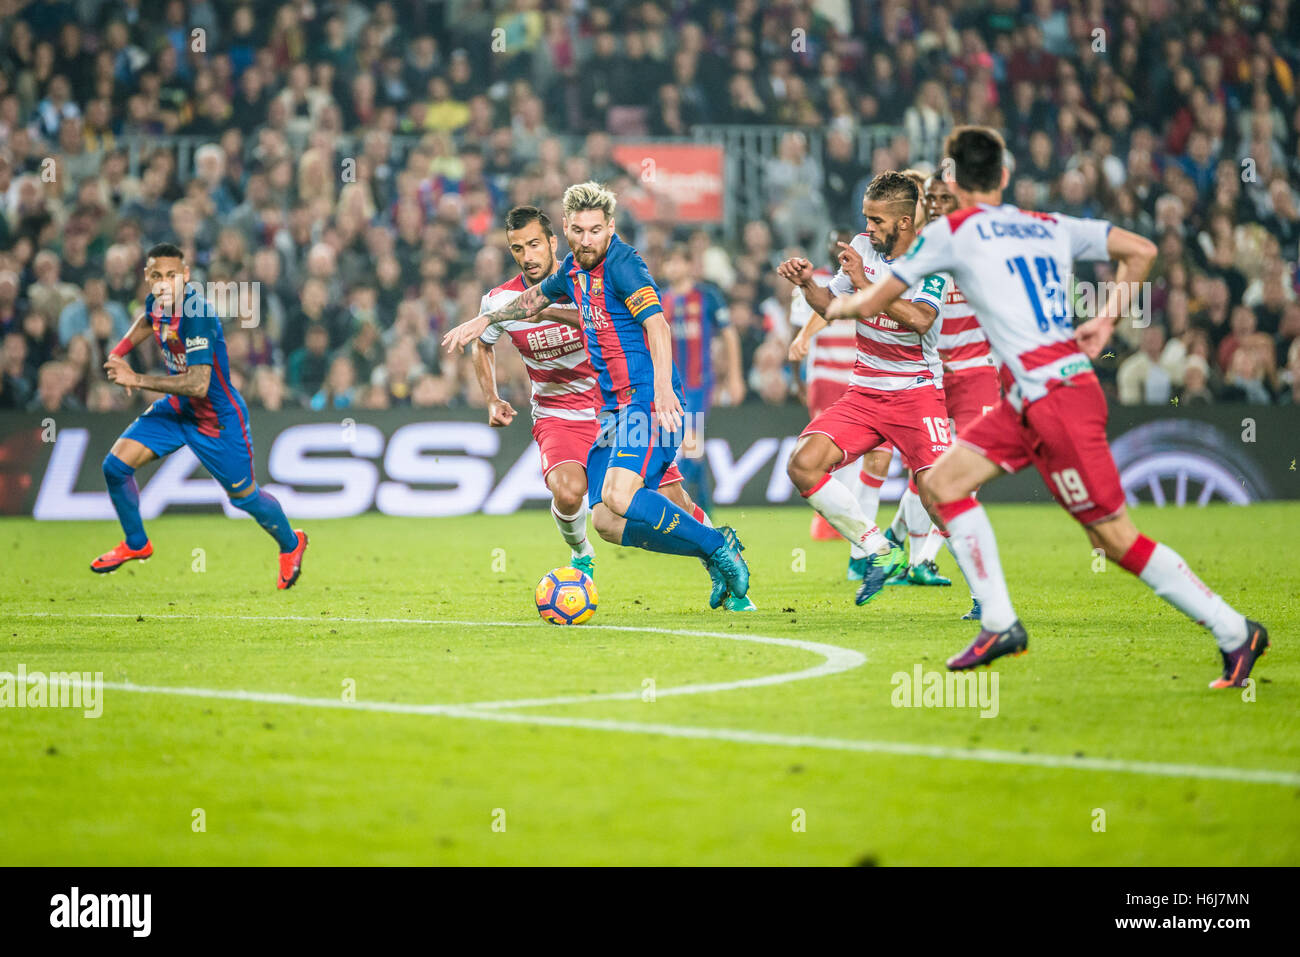 Barcelona, Catalonia, Spain. 29th Oct, 2016. FC Barcelona forward MESSI competes for the ball during the LaLiga match between FC Barcelona and Granada CF at the Camp Nou stadium in Barcelona © Matthias Oesterle/ZUMA Wire/Alamy Live News Stock Photo